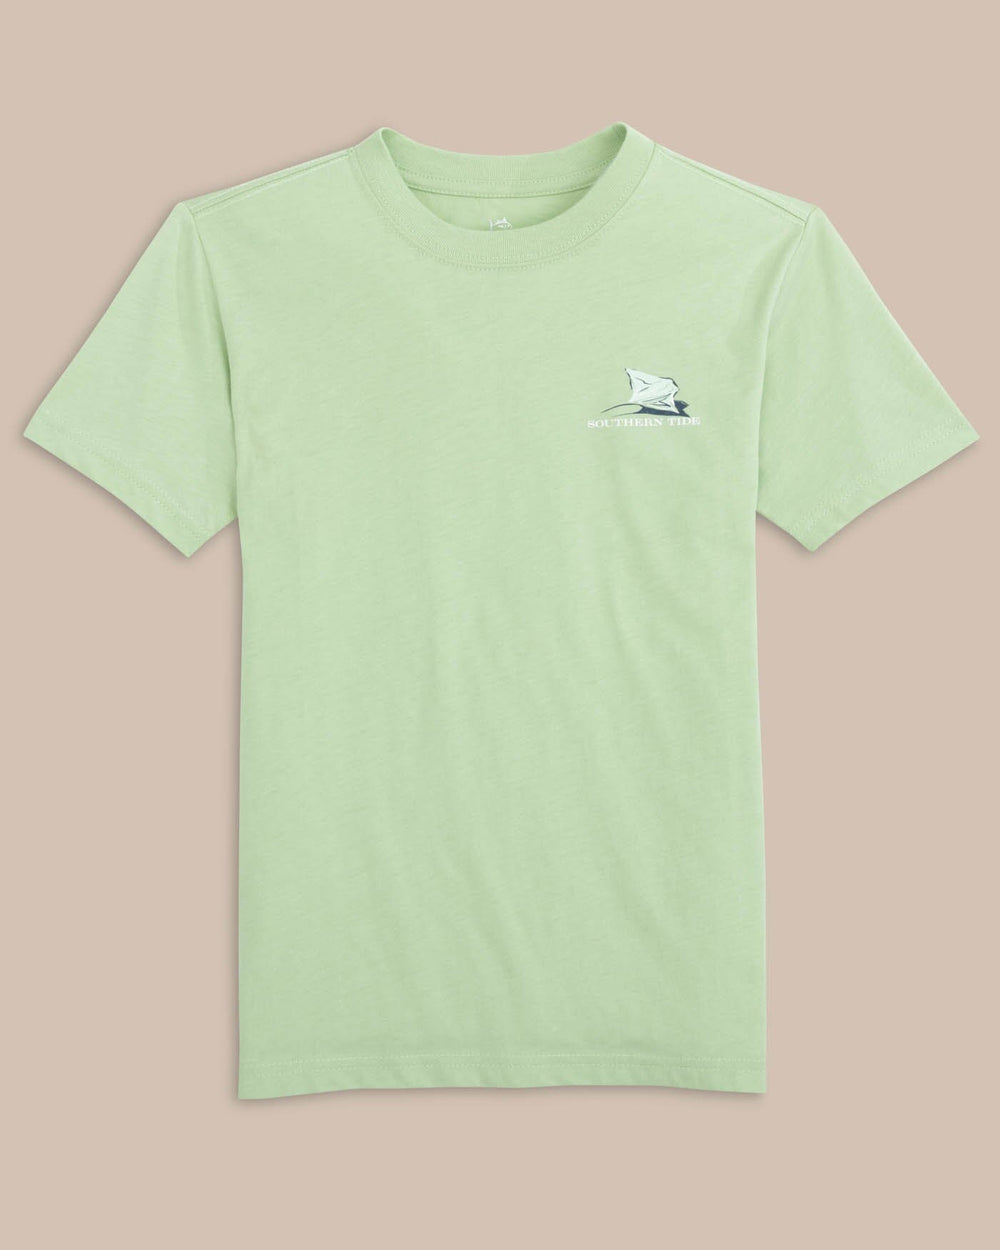 The front view of the Southern Tide Youth Yachts of Sharks Short Sleeve T-shirt by Southern Tide - Smoke Green